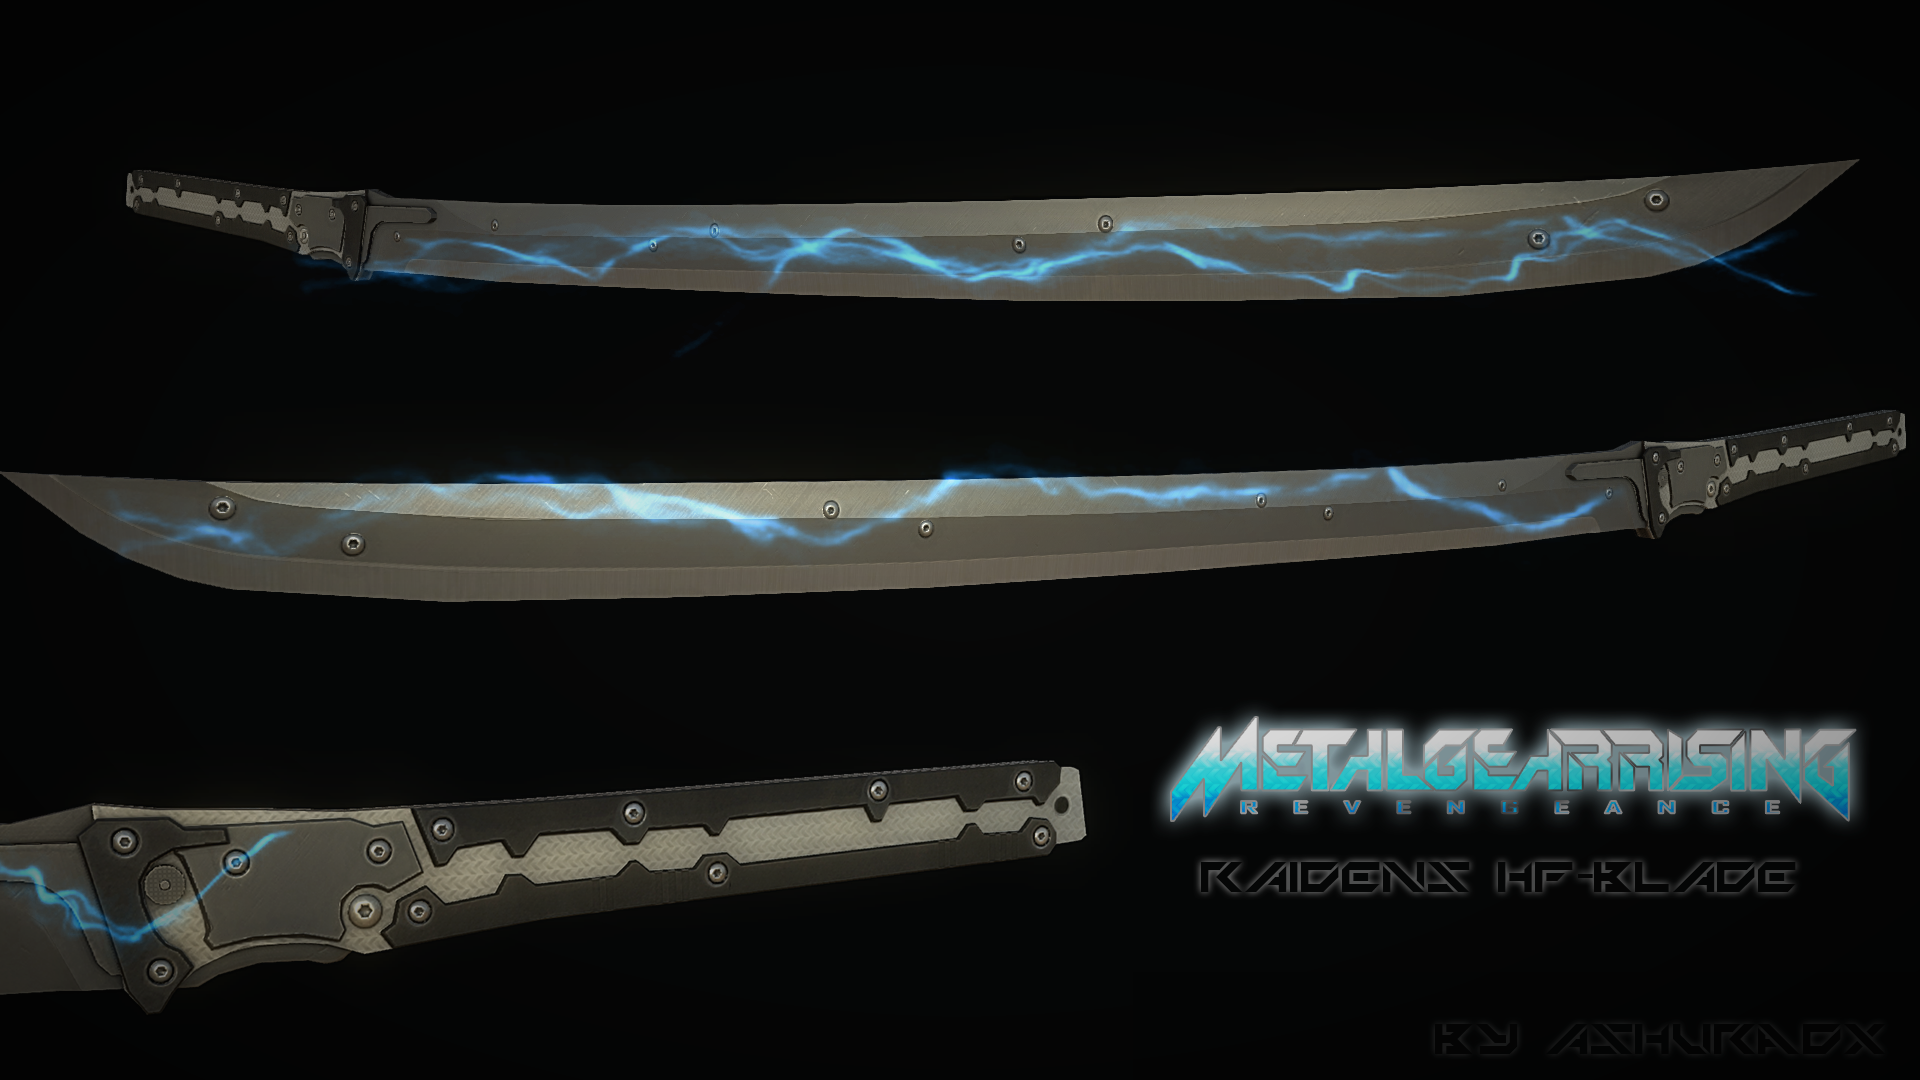 More information about "RAIDEN'S HIGH FREQUENCY BLADE (METAL GEAR RISING)"